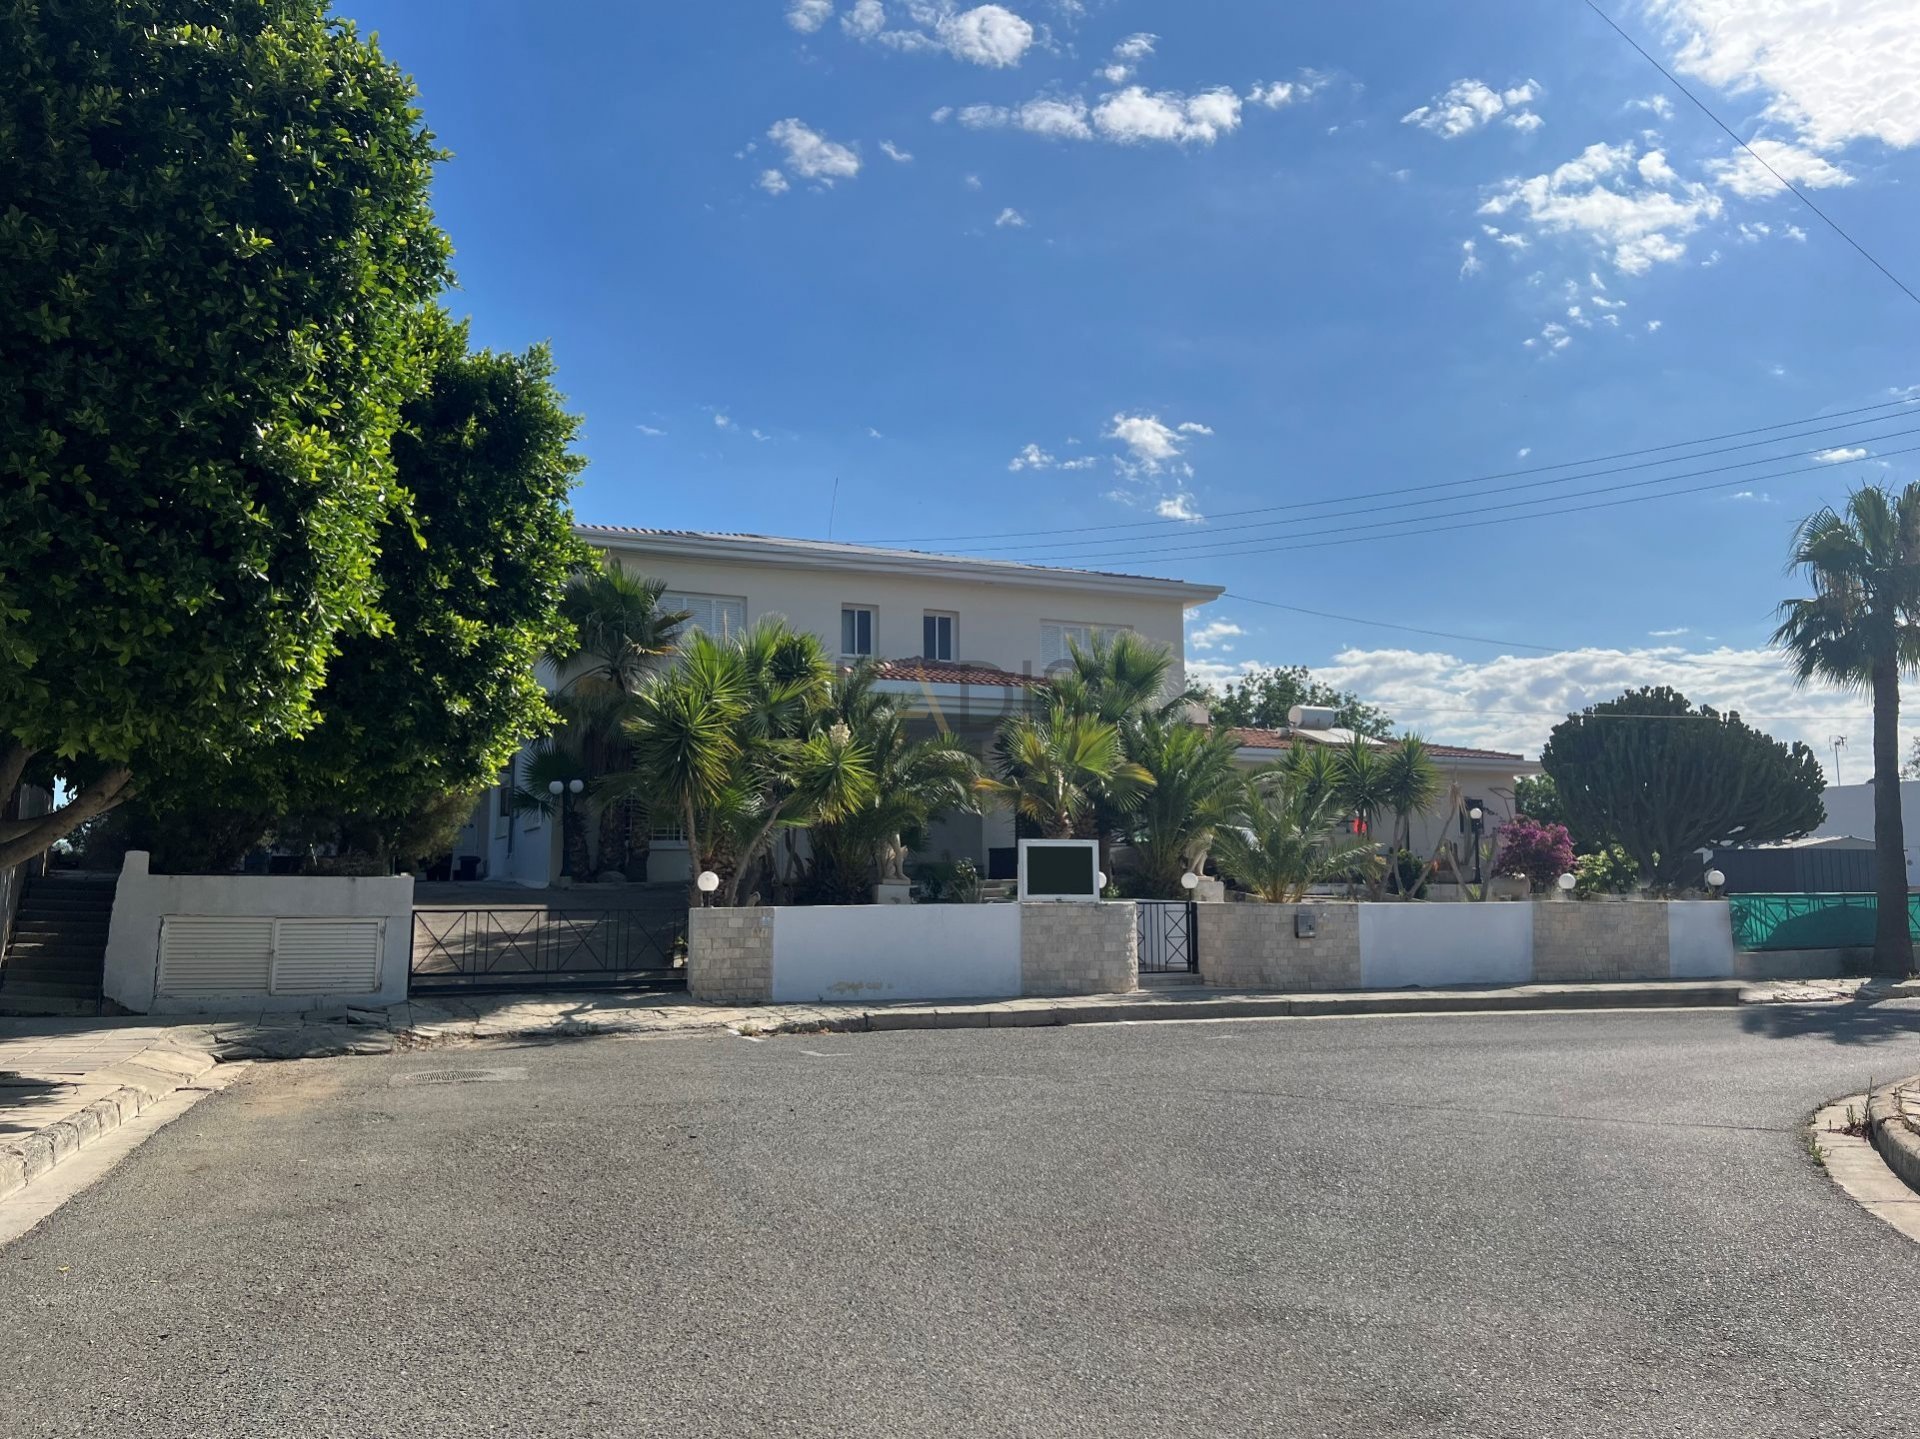 6+ Bedroom House for Sale in Strovolos, Nicosia District